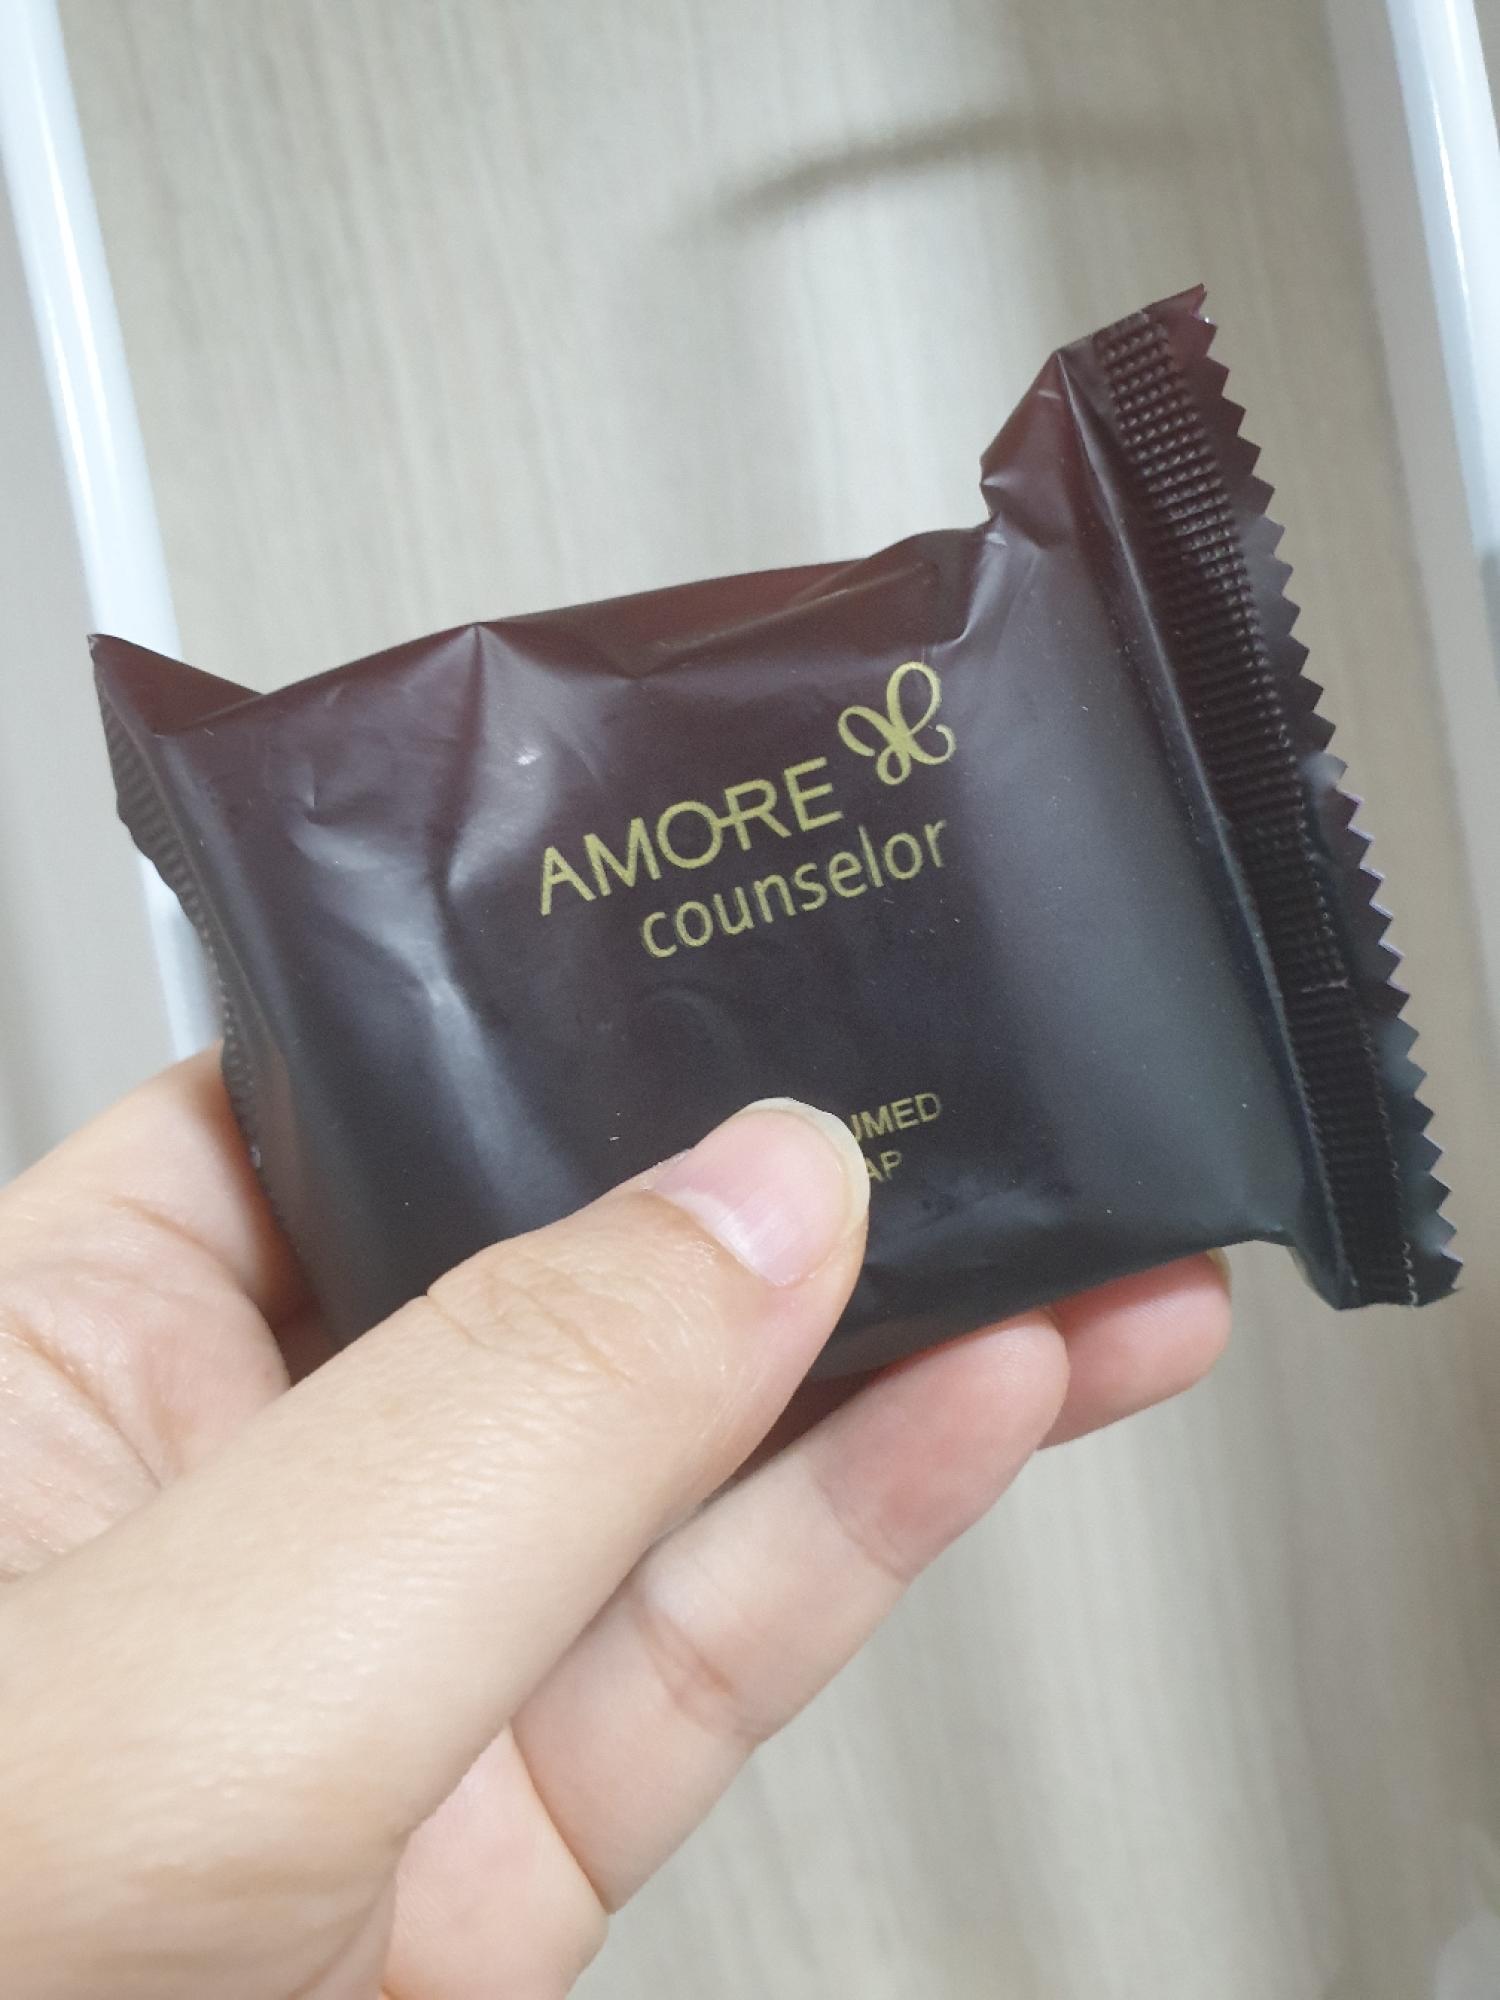 54 Pieces AMORE Counselor Perfumed Bar Soaps Body Facial Skincare